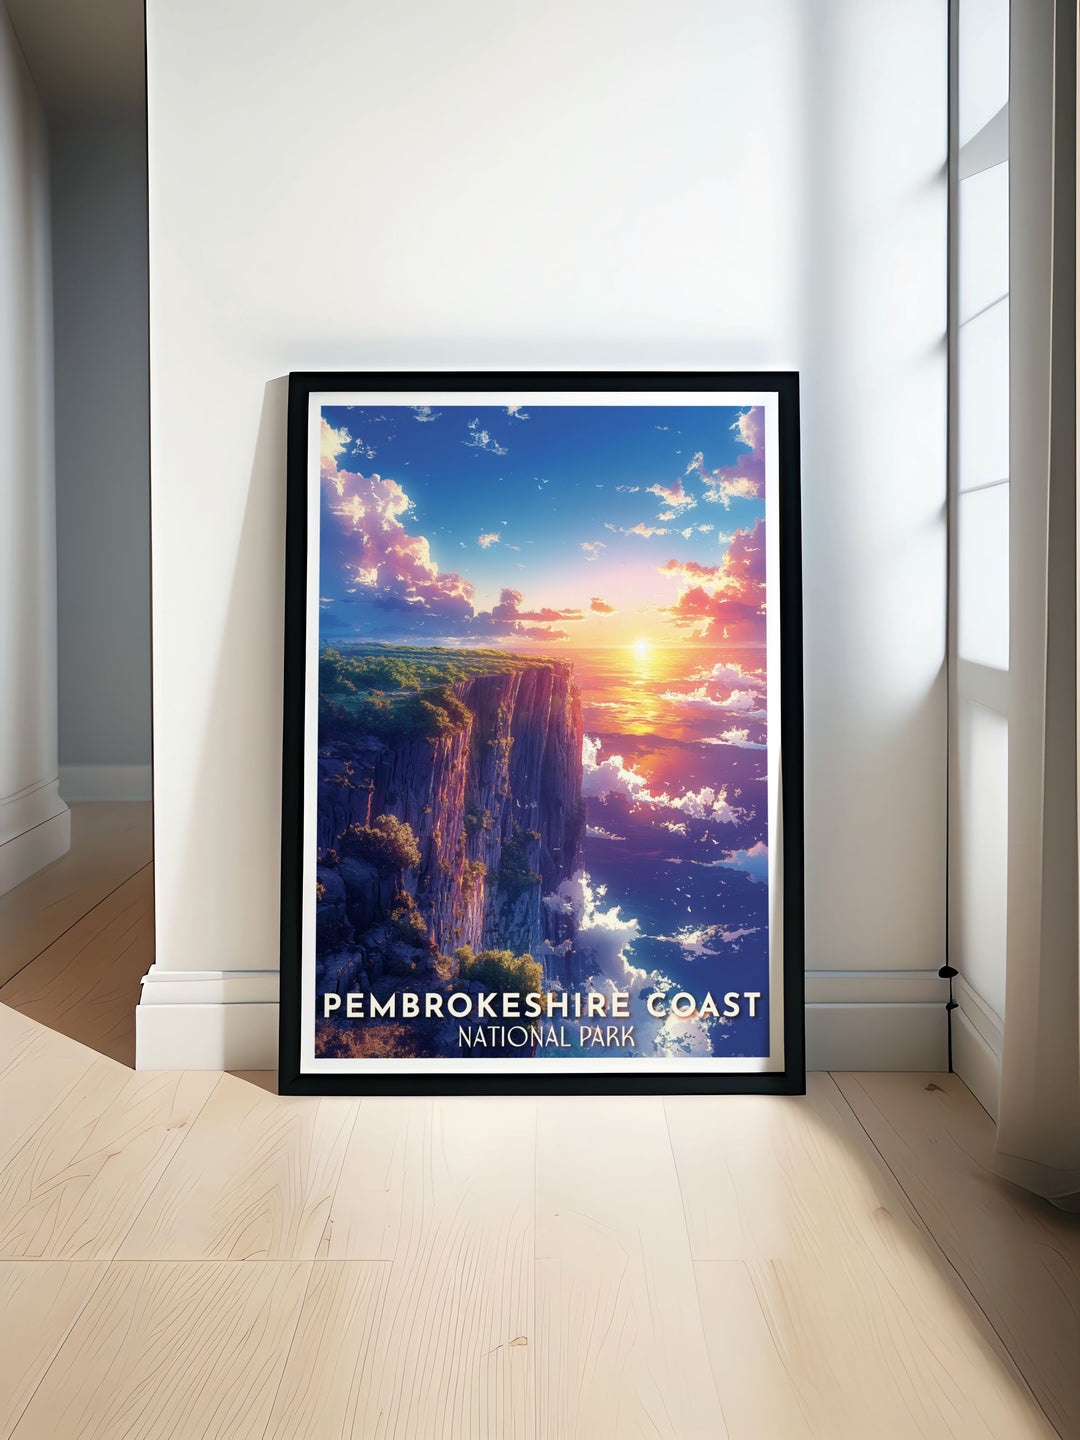 Explore the diverse scenery of Pembrokeshire Coast with this travel poster, featuring the lush woodlands, rolling hills, and vibrant wildlife that make this park a natural treasure.